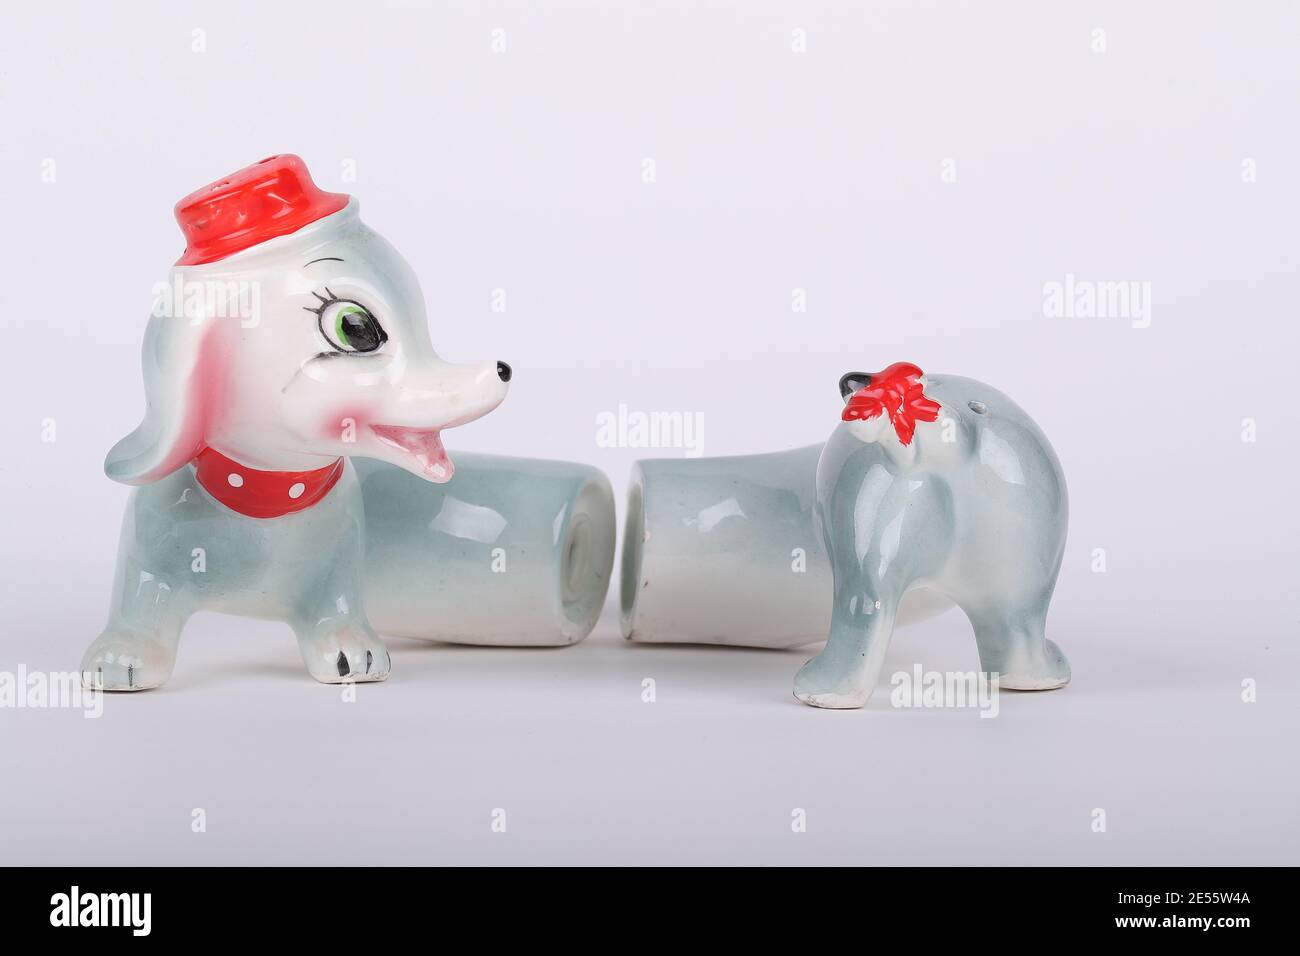 Vintage Weiner Dog Salt and Pepper Shakers from the 70's - 80's. Luke Durda/Alamy Stock Photo